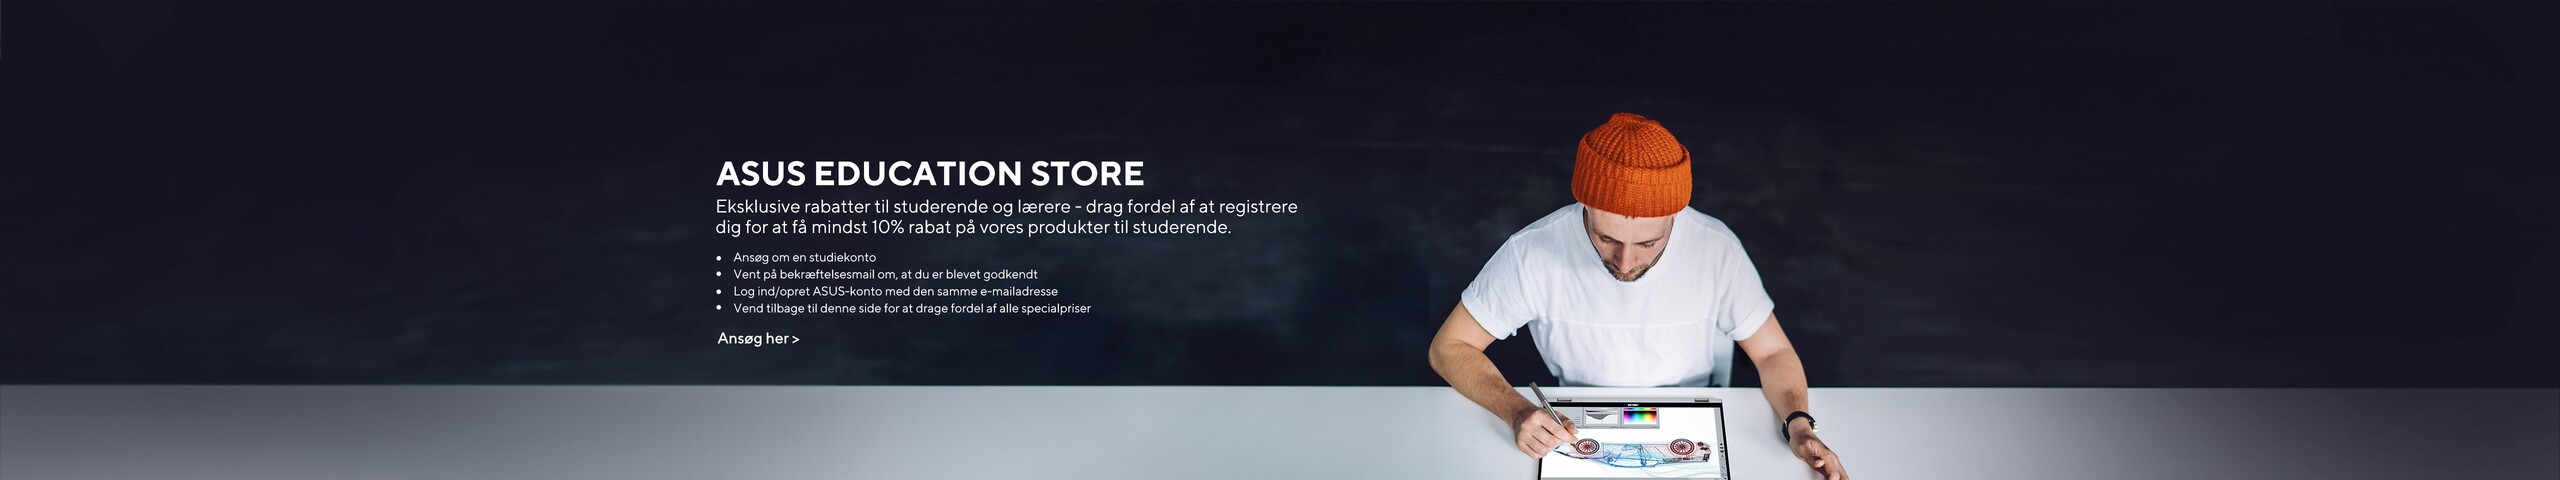 Education Store